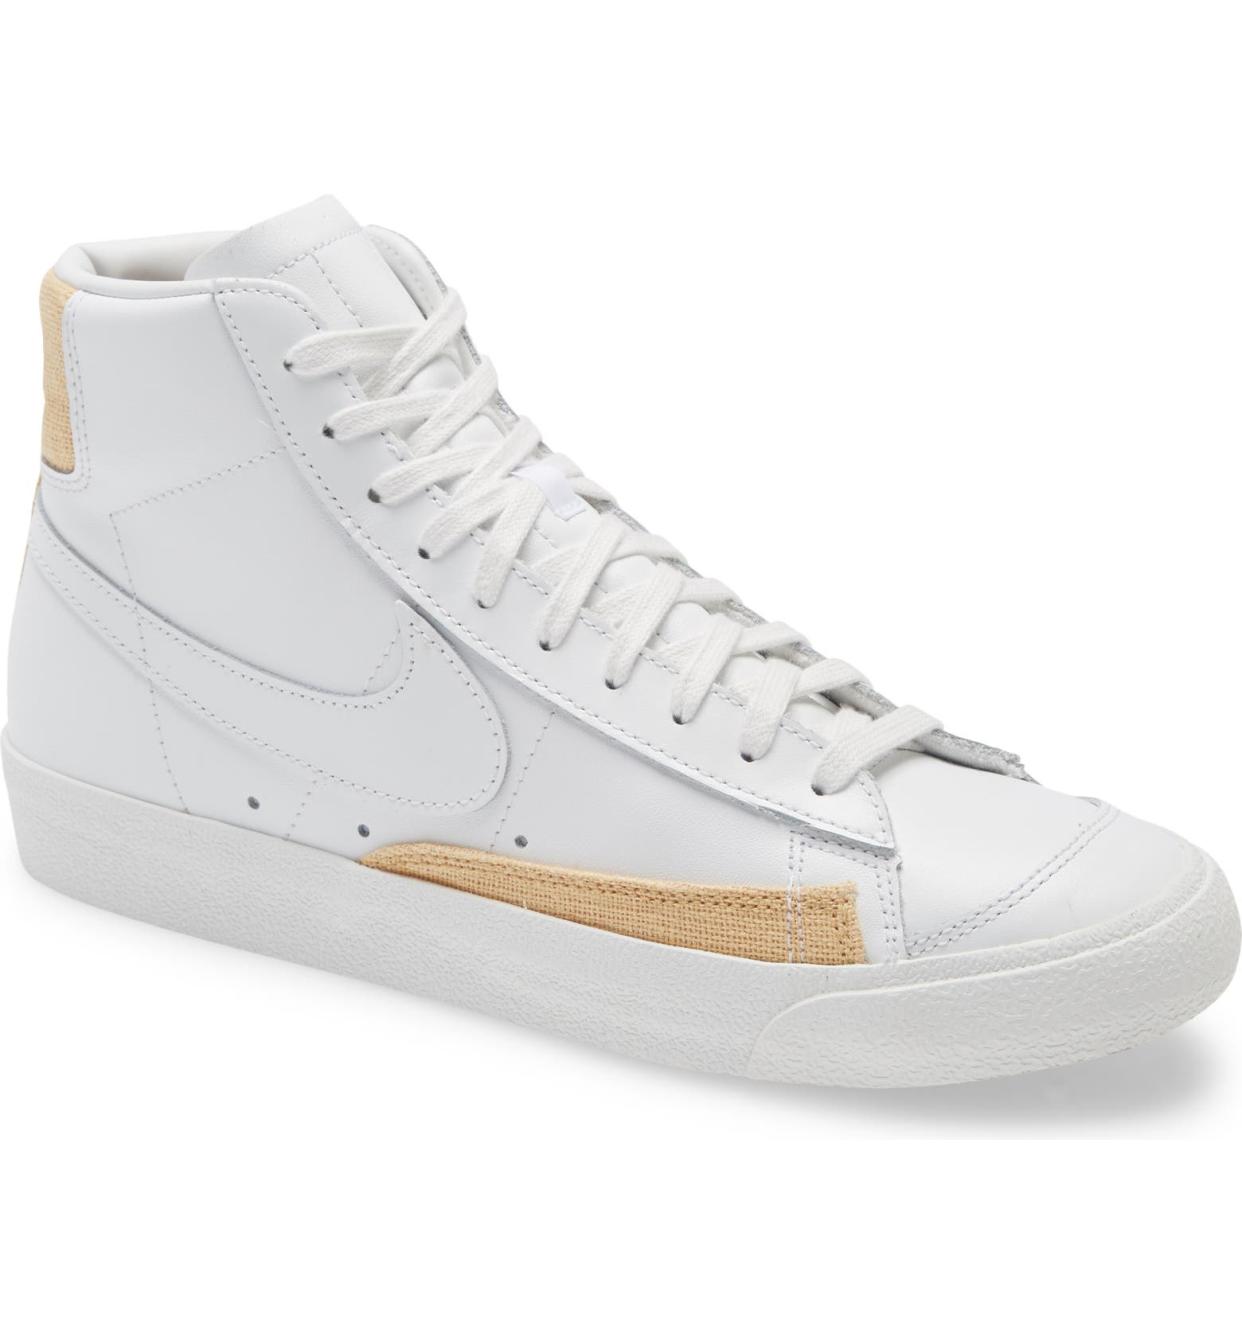 White high top sneakers